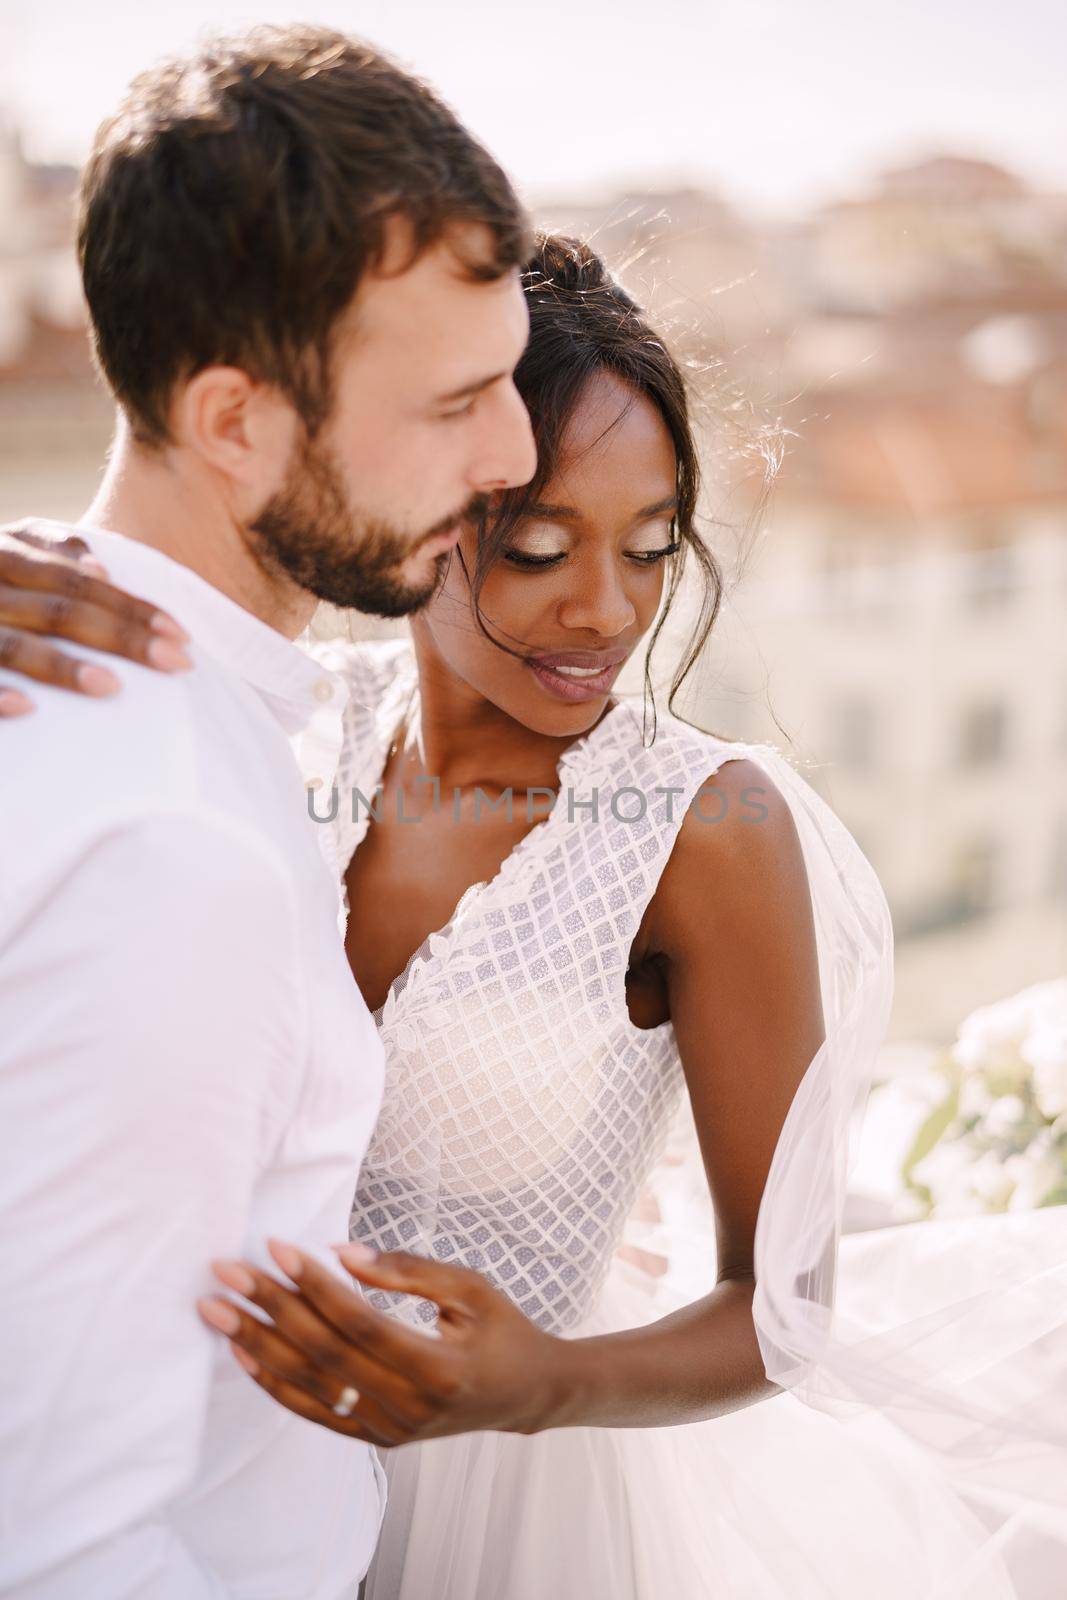 Destination fine-art wedding in Florence, Italy. Interracial wedding couple. Caucasian groom and African-American bride cuddling on a rooftop in sunset sunlight. by Nadtochiy